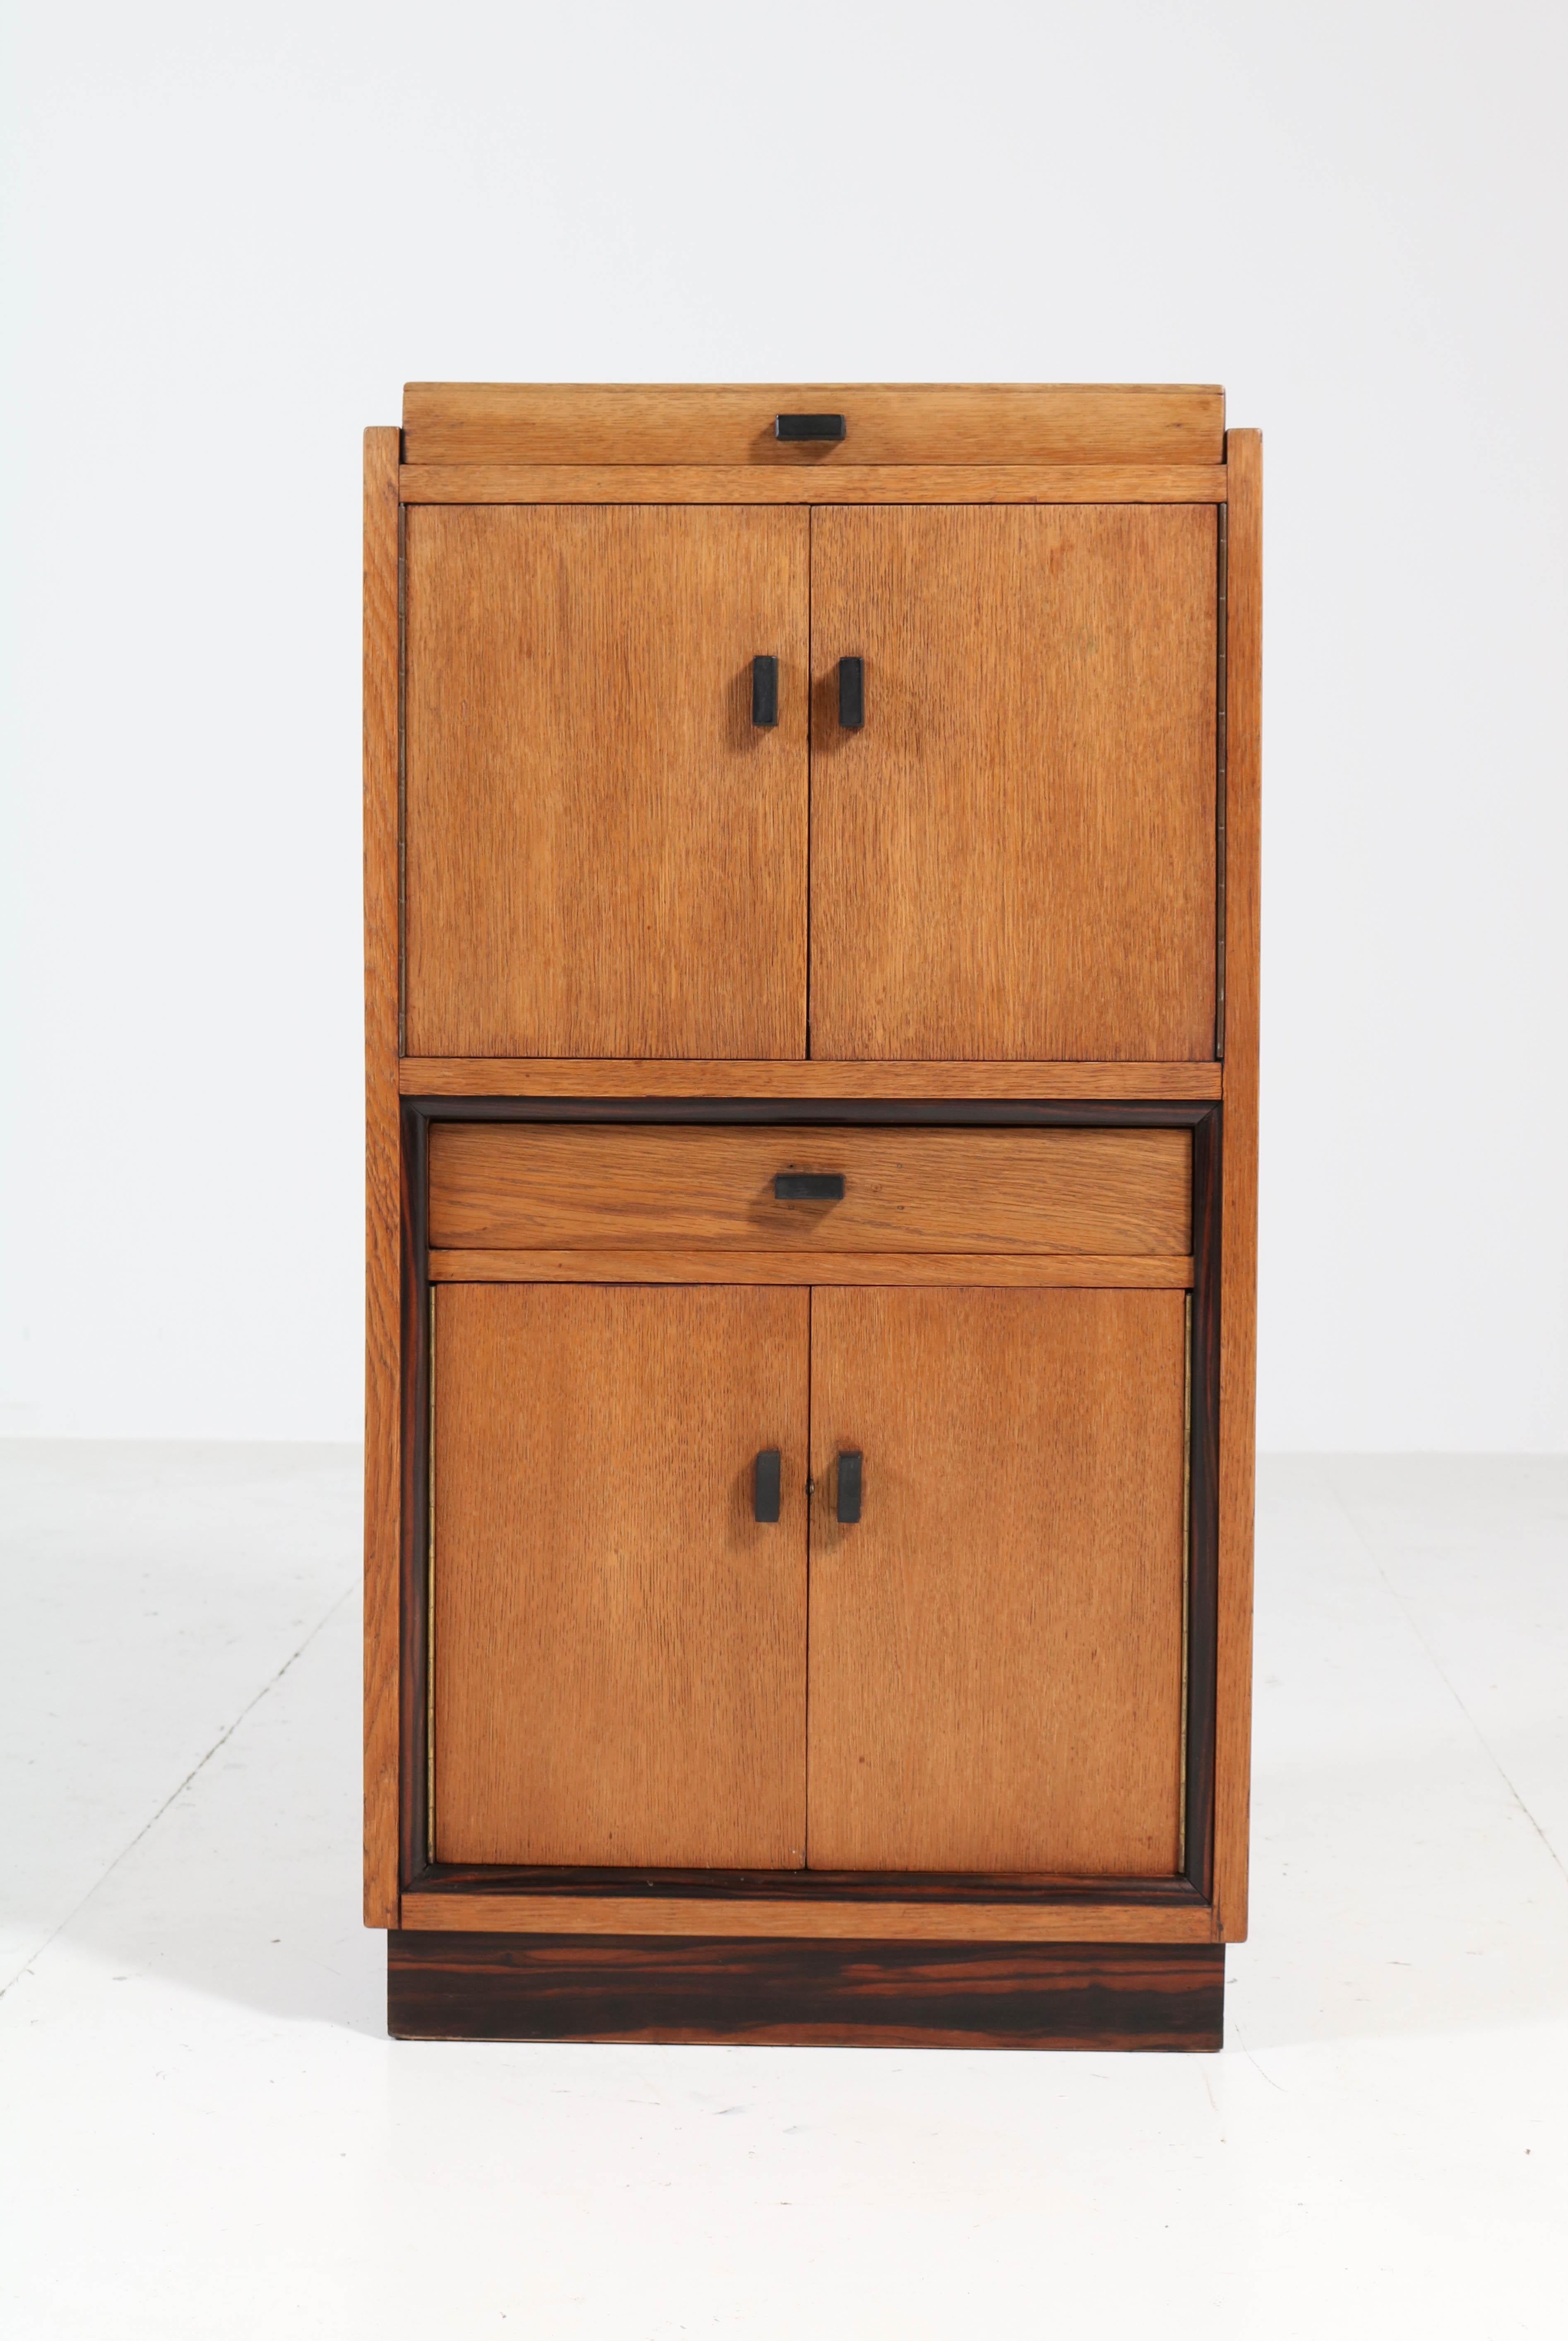 Wonderful and rare Art Deco Haagse School cabinet or dry bar.
Striking Dutch design from the 1920s.
Oak with ebonized handles and solid ebony Macassar lining.
In very good condition with minor wear consistent with age and use,
preserving a